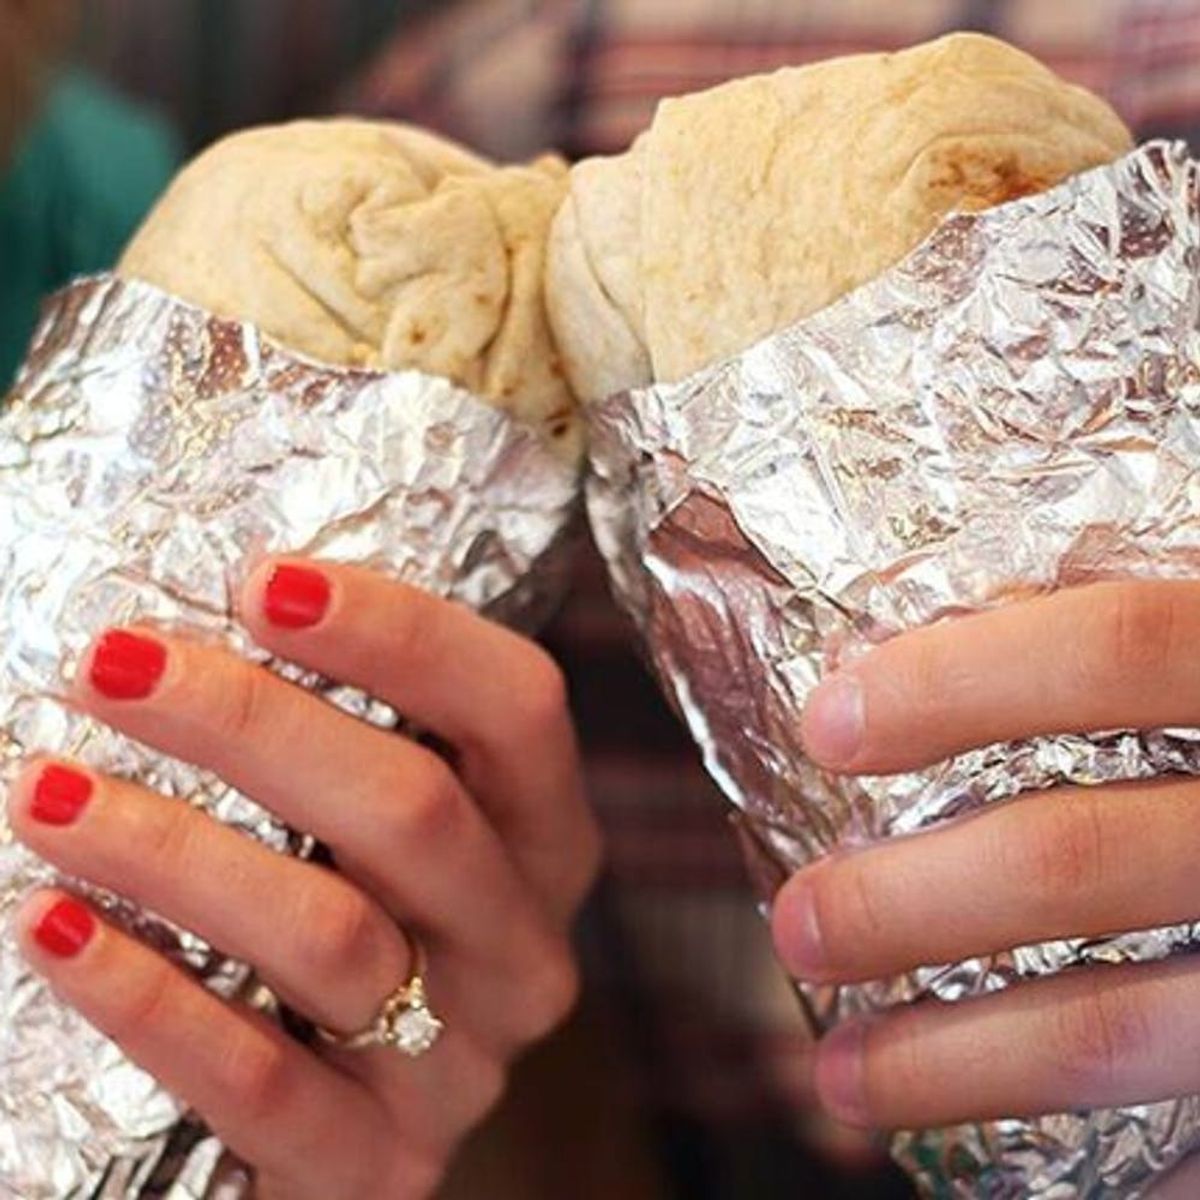 Chipotle Is Spicing Up Its Menu With Chorizo